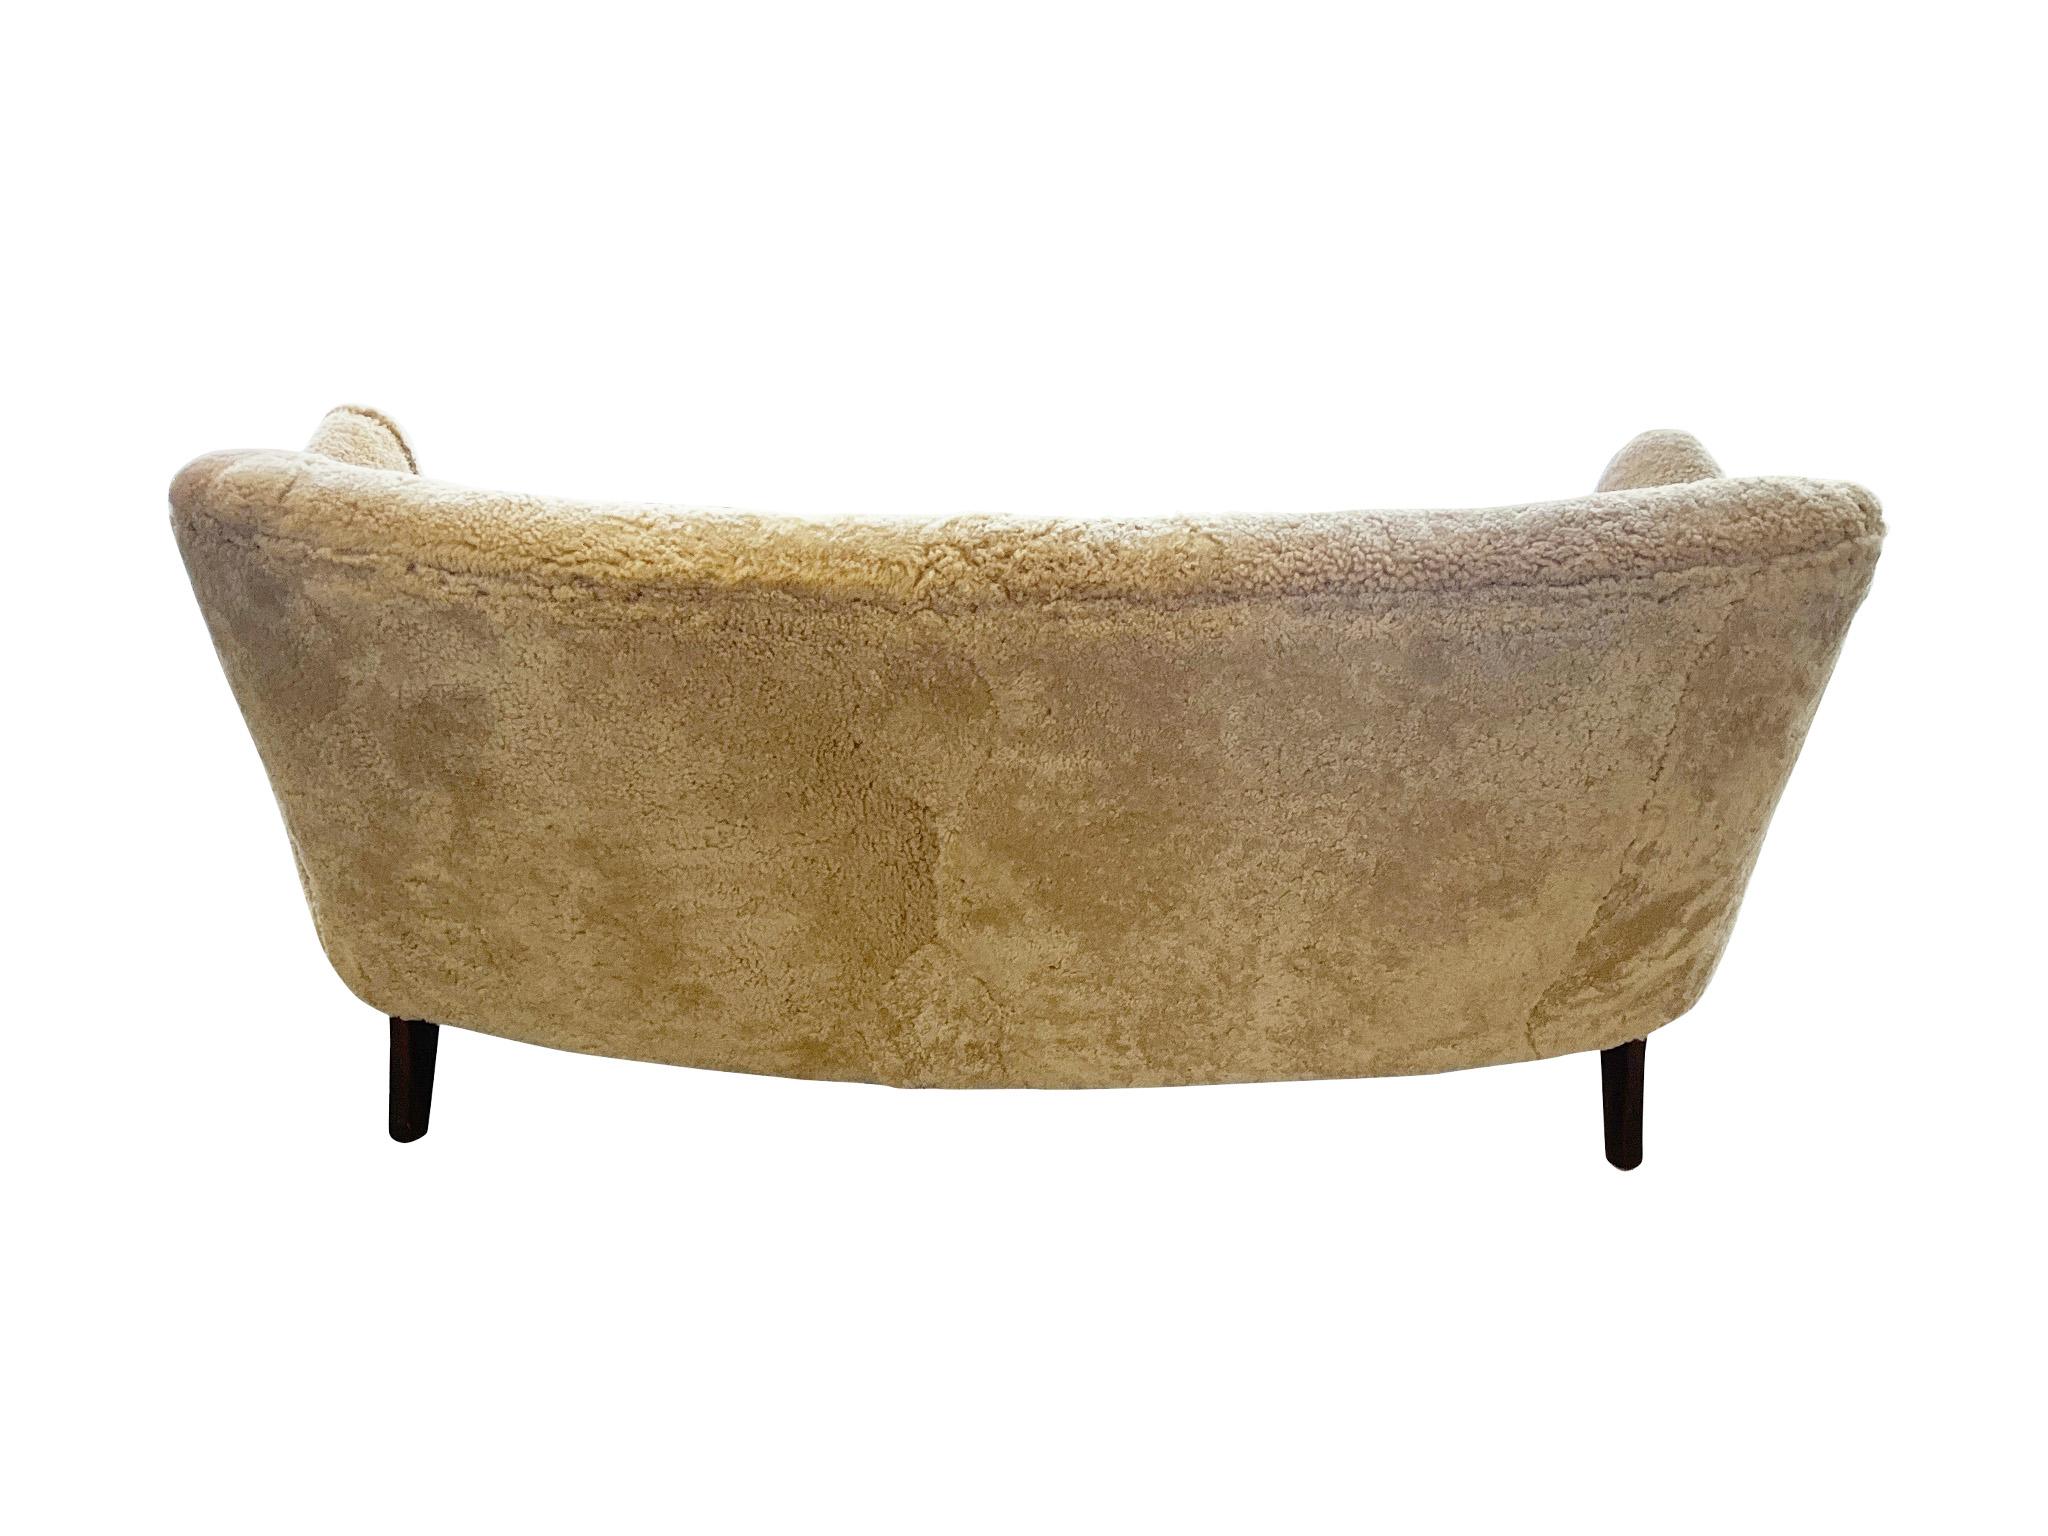 Mid-20th Century 1940s Danish Settee by Ole Wanscher in Tan Shearling